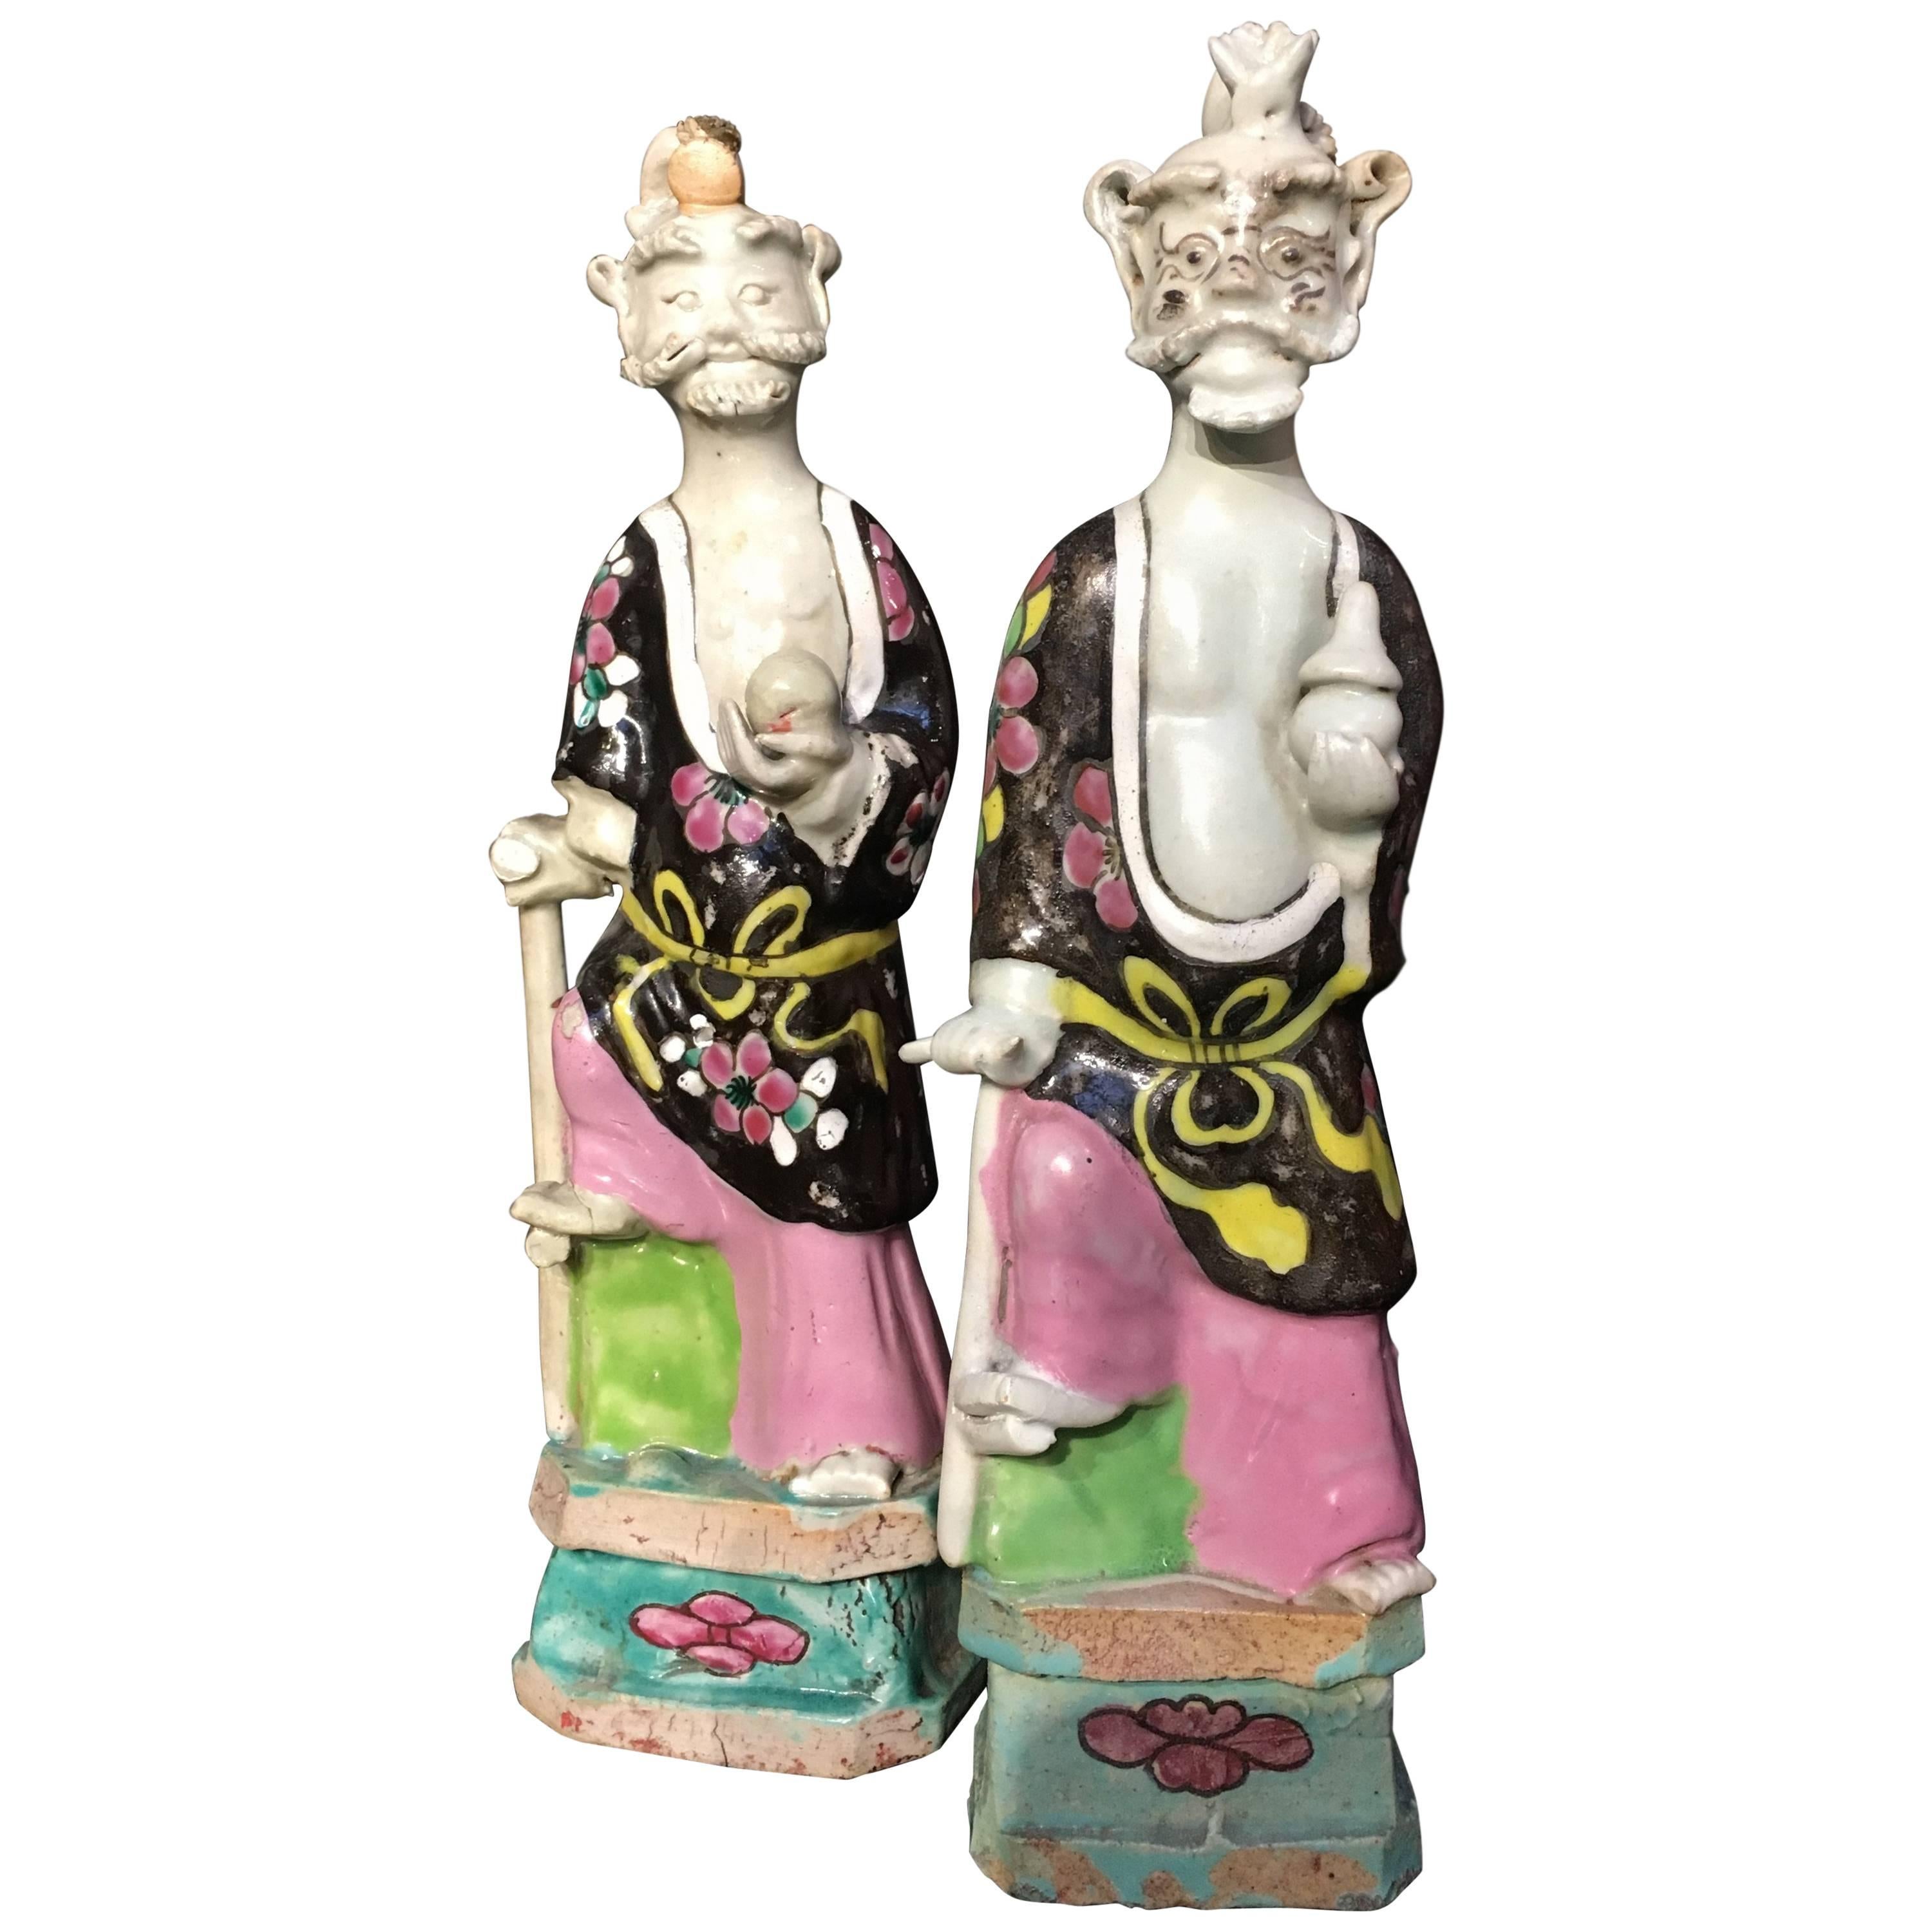 Near Pair of 18th Century Chinese Export Famille Rose Figures of Immortals